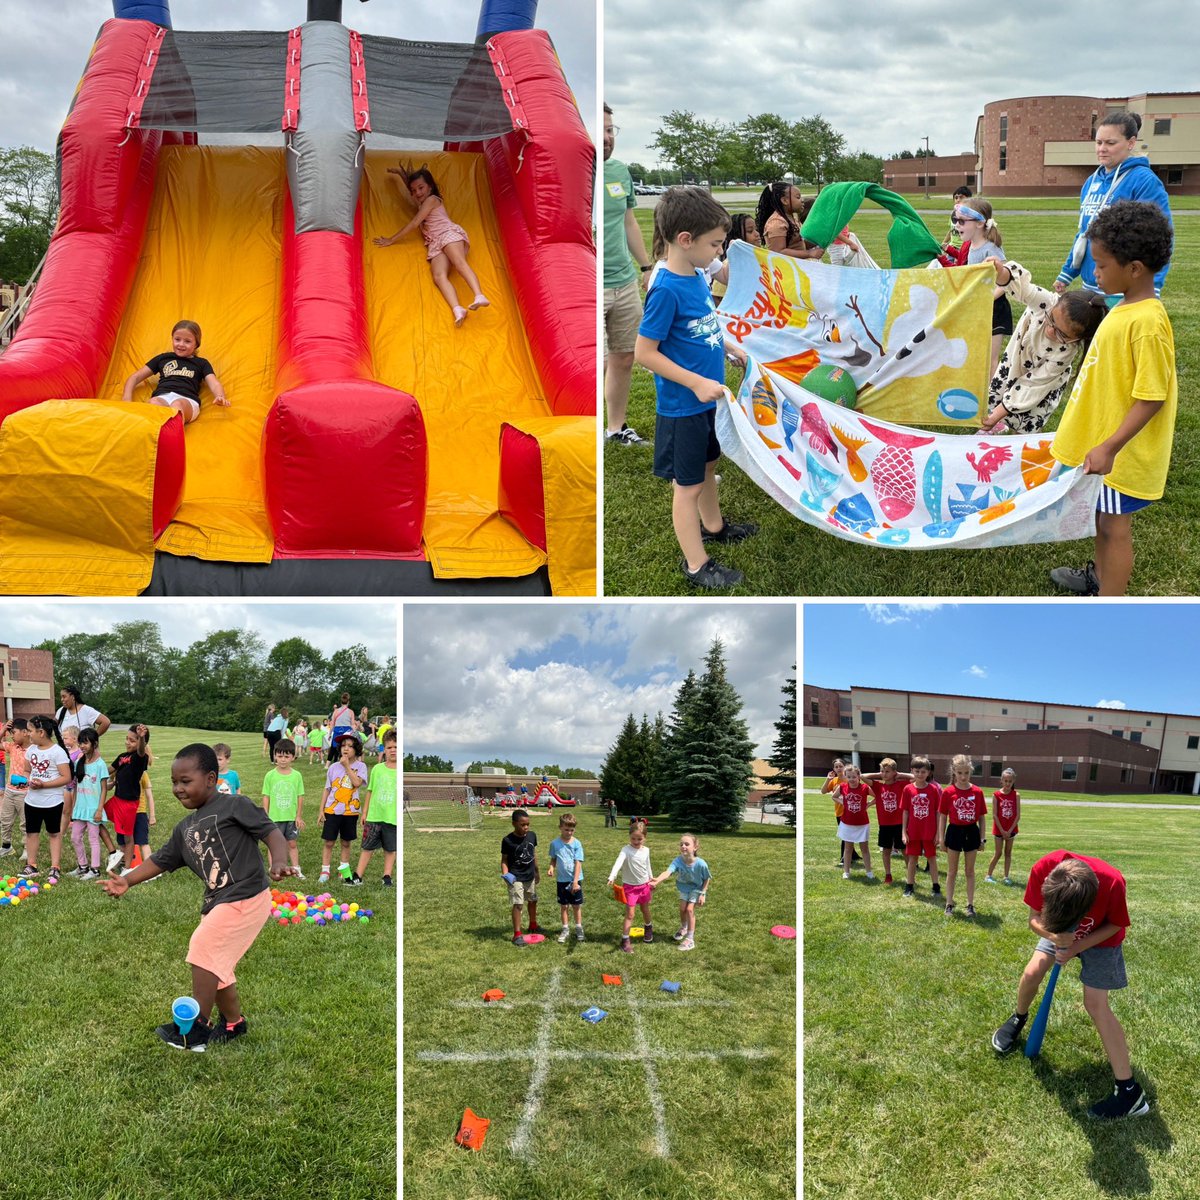 #Yes Field Day Fun @FCEhse! 😎 
A Big shoutout to our @fcepto for organizing this special day! Thank you to all our parent volunteers, too! 💚
Our #FCEfish had a blast! 🎉